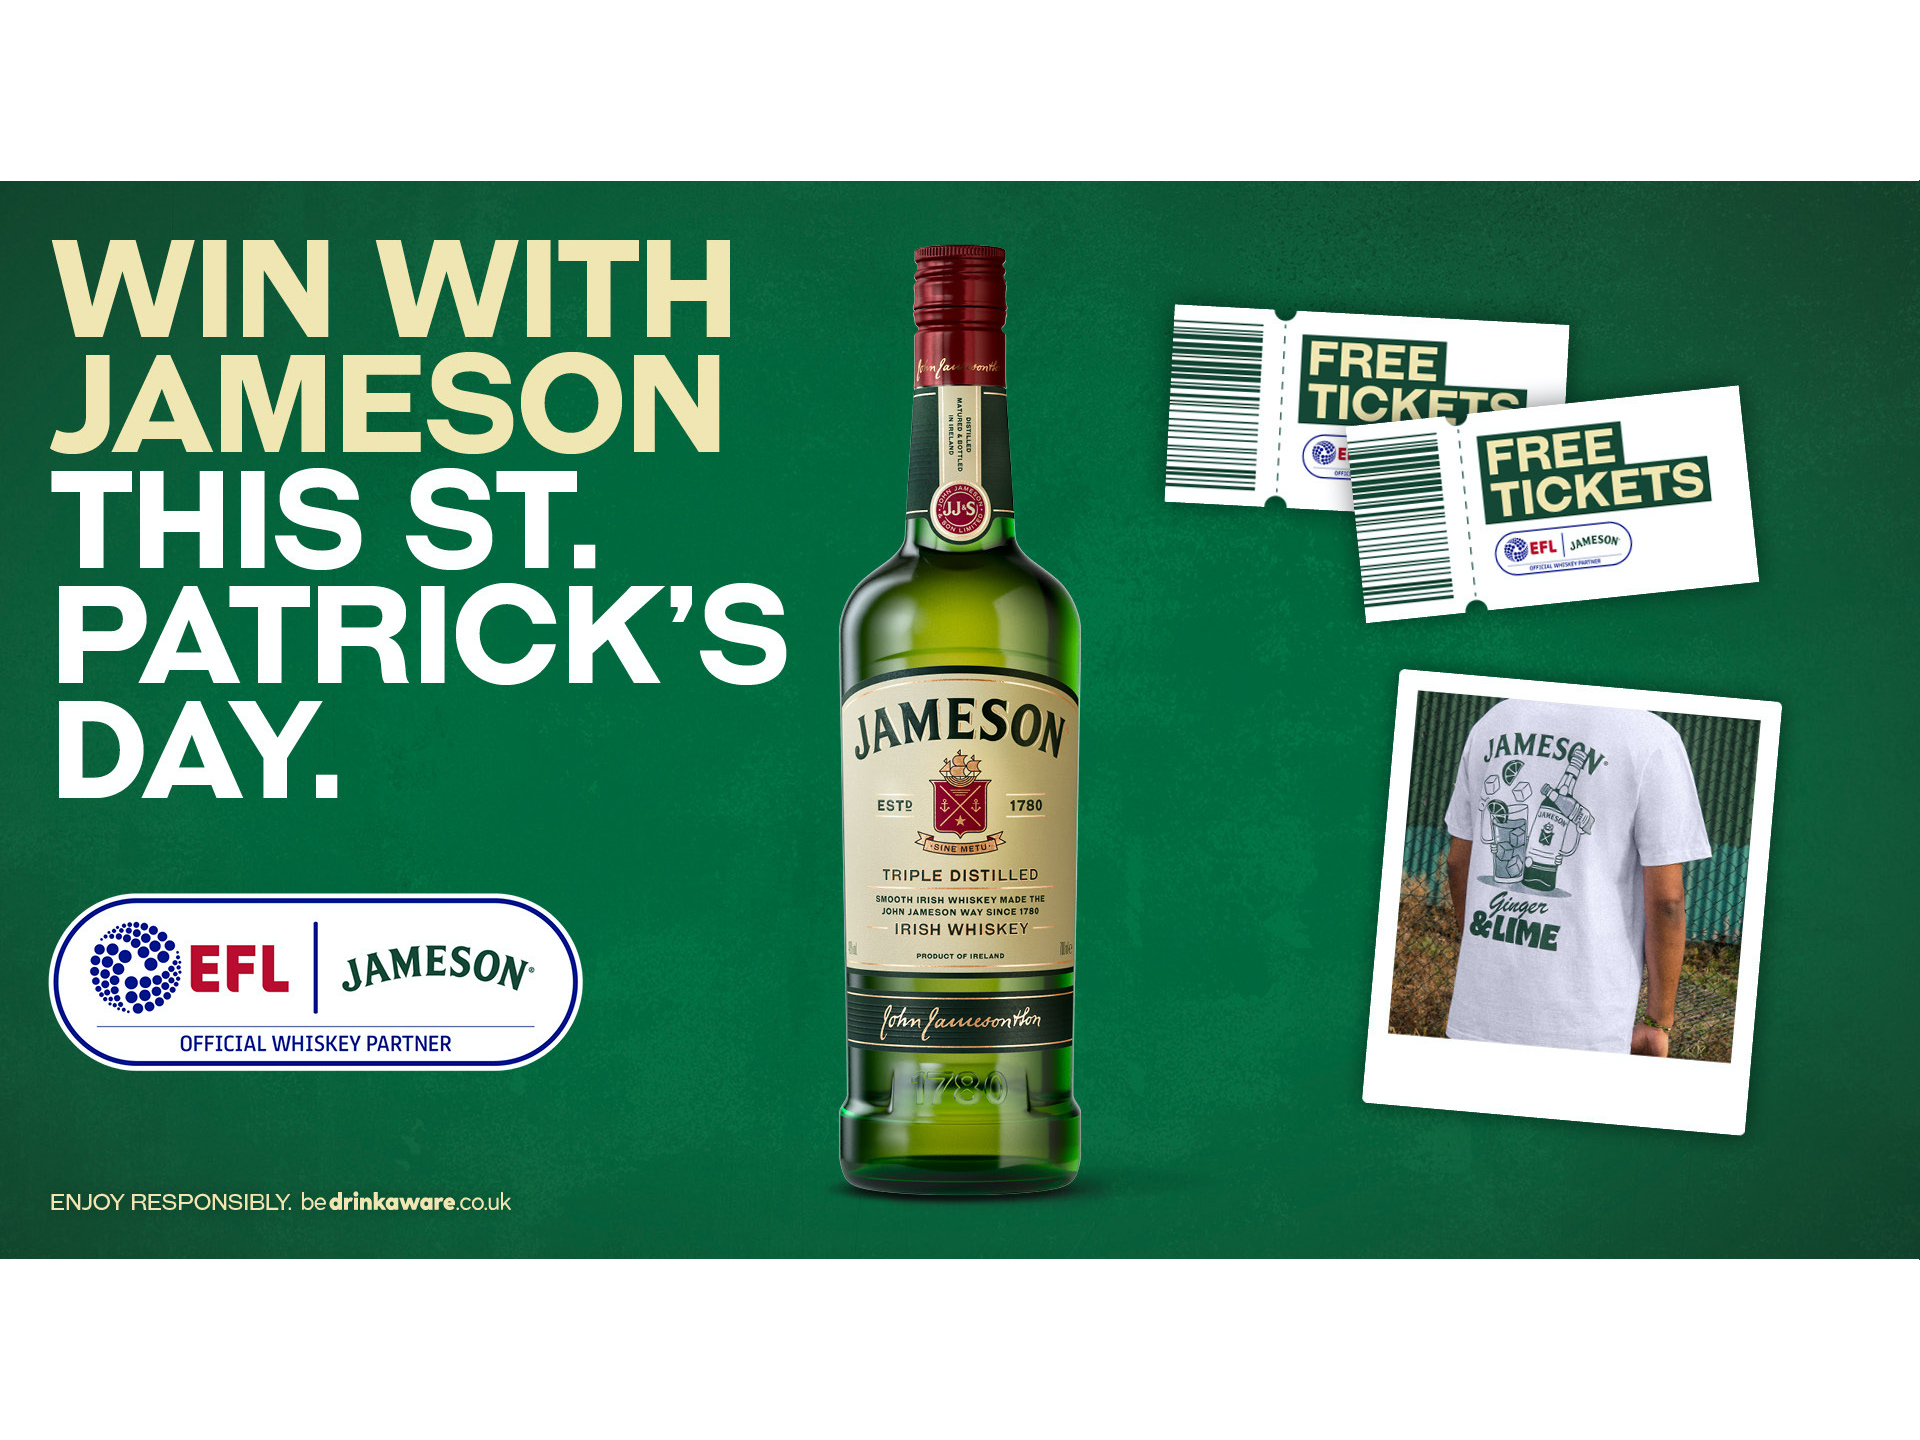 Jameson's competition graphic for St. Patrick's Day